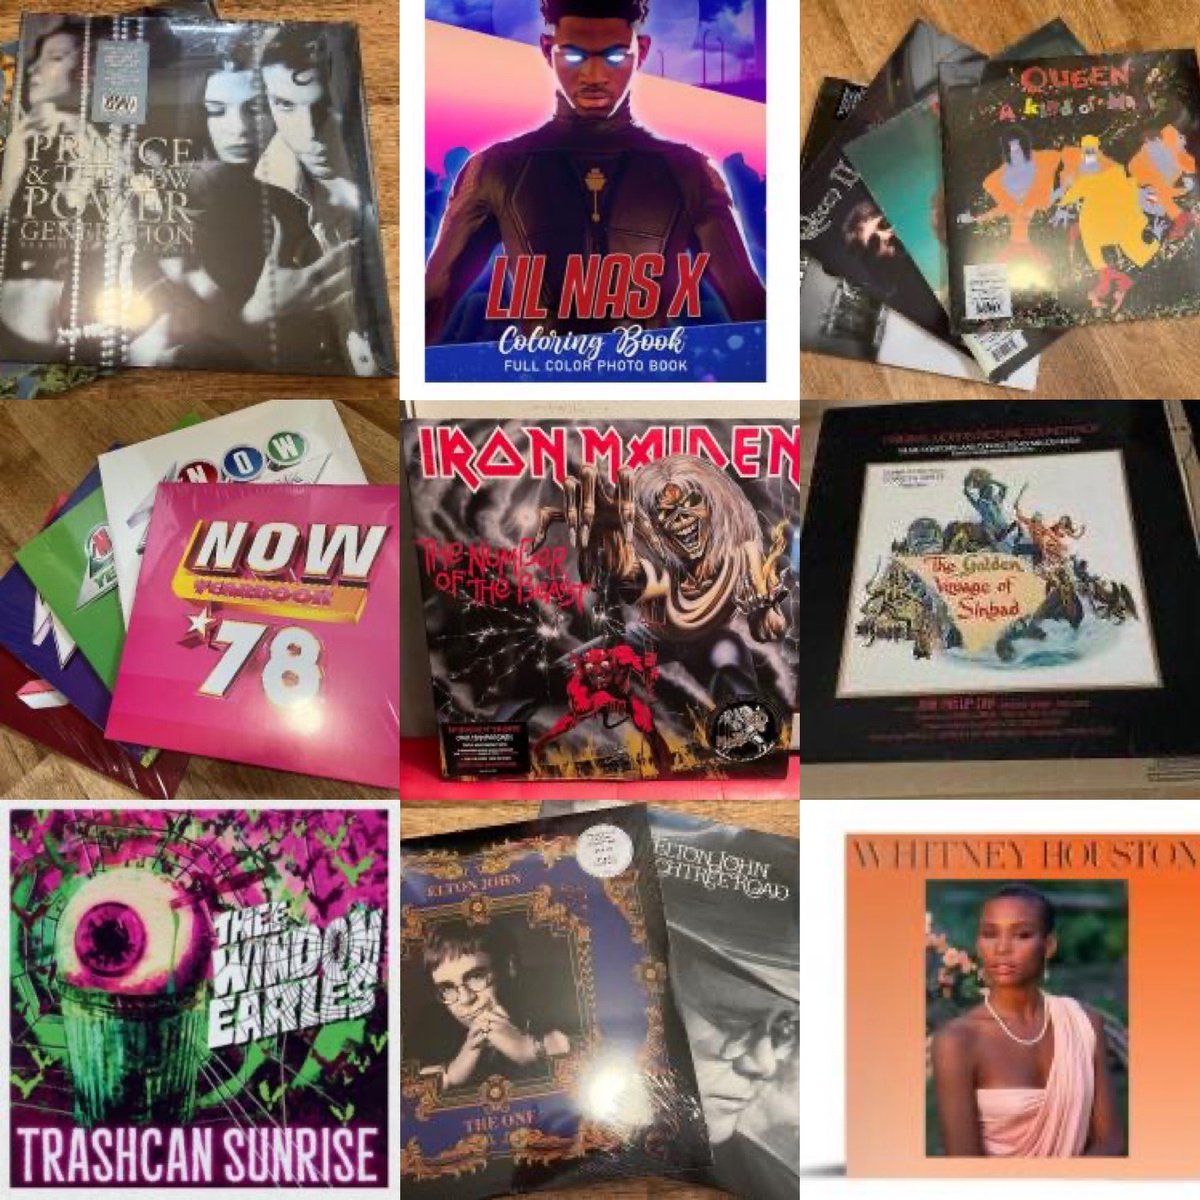 “Dance Yourself Dizzy' with the 2024 Music Auction from @davecrossx for @cabaretvscancer

”NOW LIVE!🙀🎤

jumblebee.co.uk/music24

❤️Autographs
Vinyl 🎧
🎤 Rare
And lots more 🎶

#charity #auction #KateBush #rare #kimwilde #recordcollector #blondie #musicfan #kylie